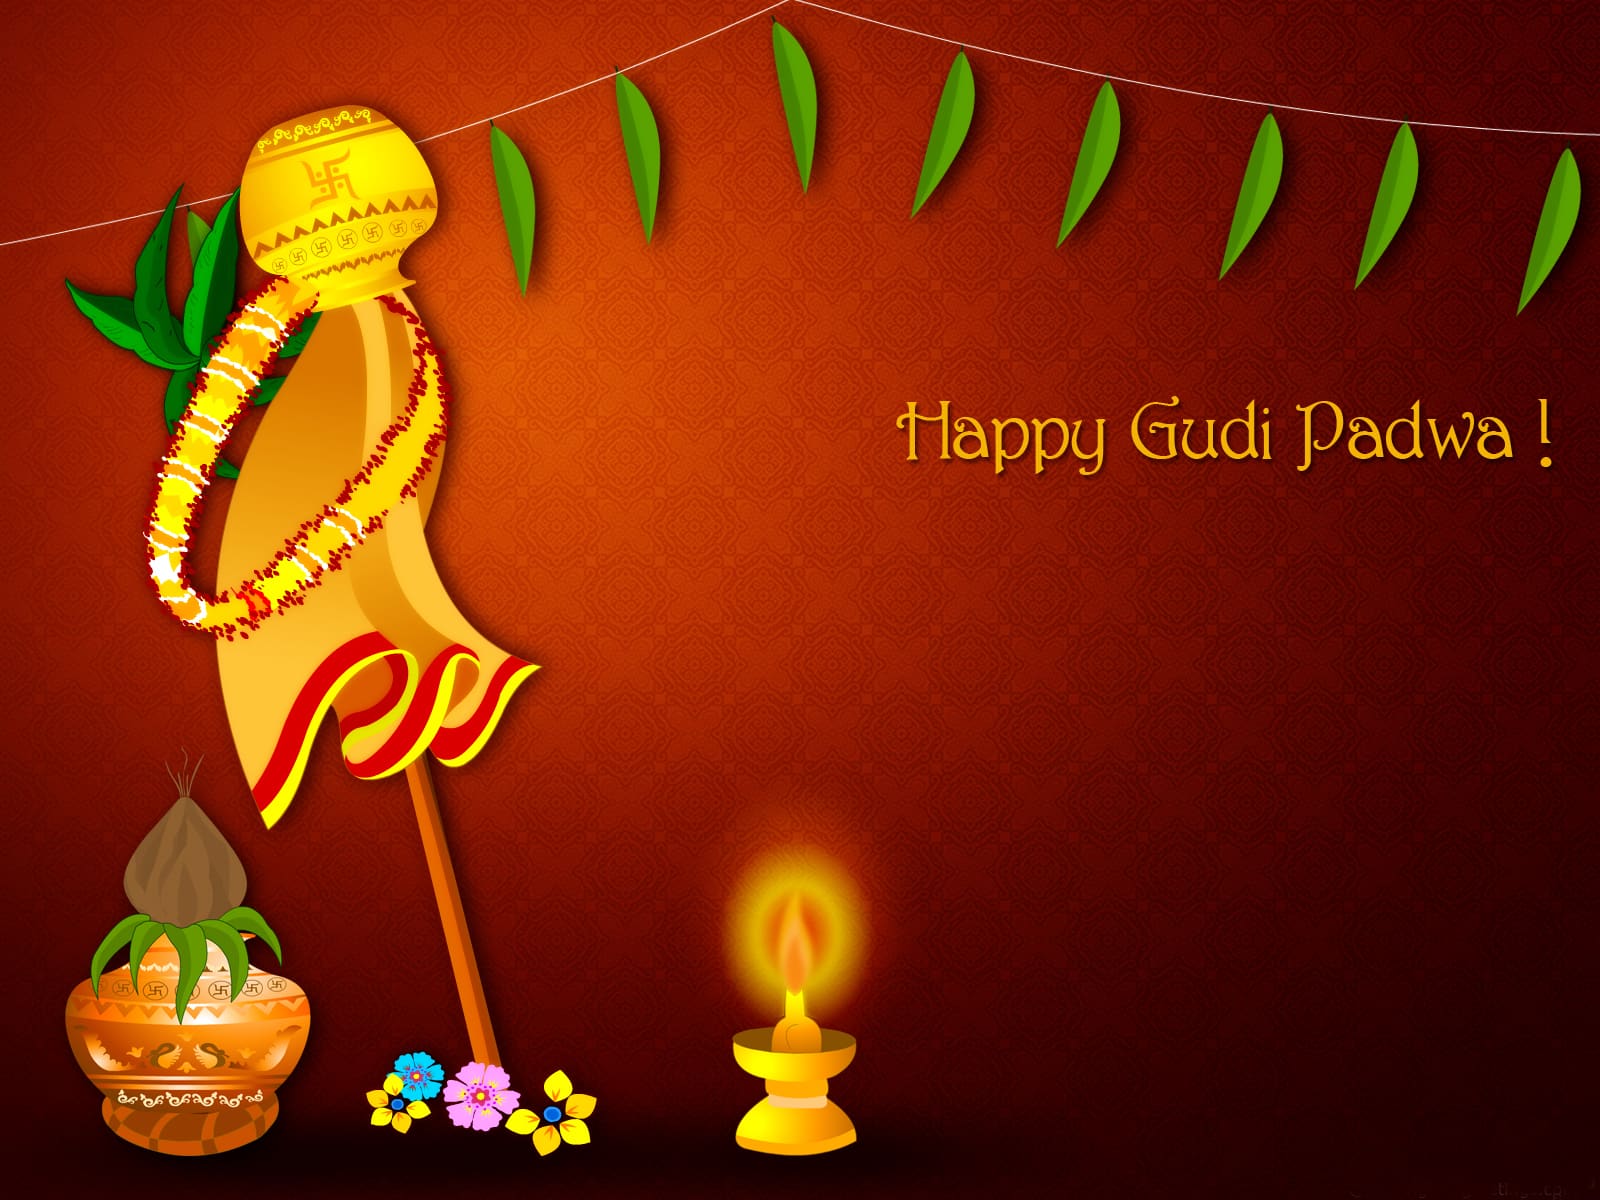 Gudi Padwa Significance, Celebration and Special Dishes